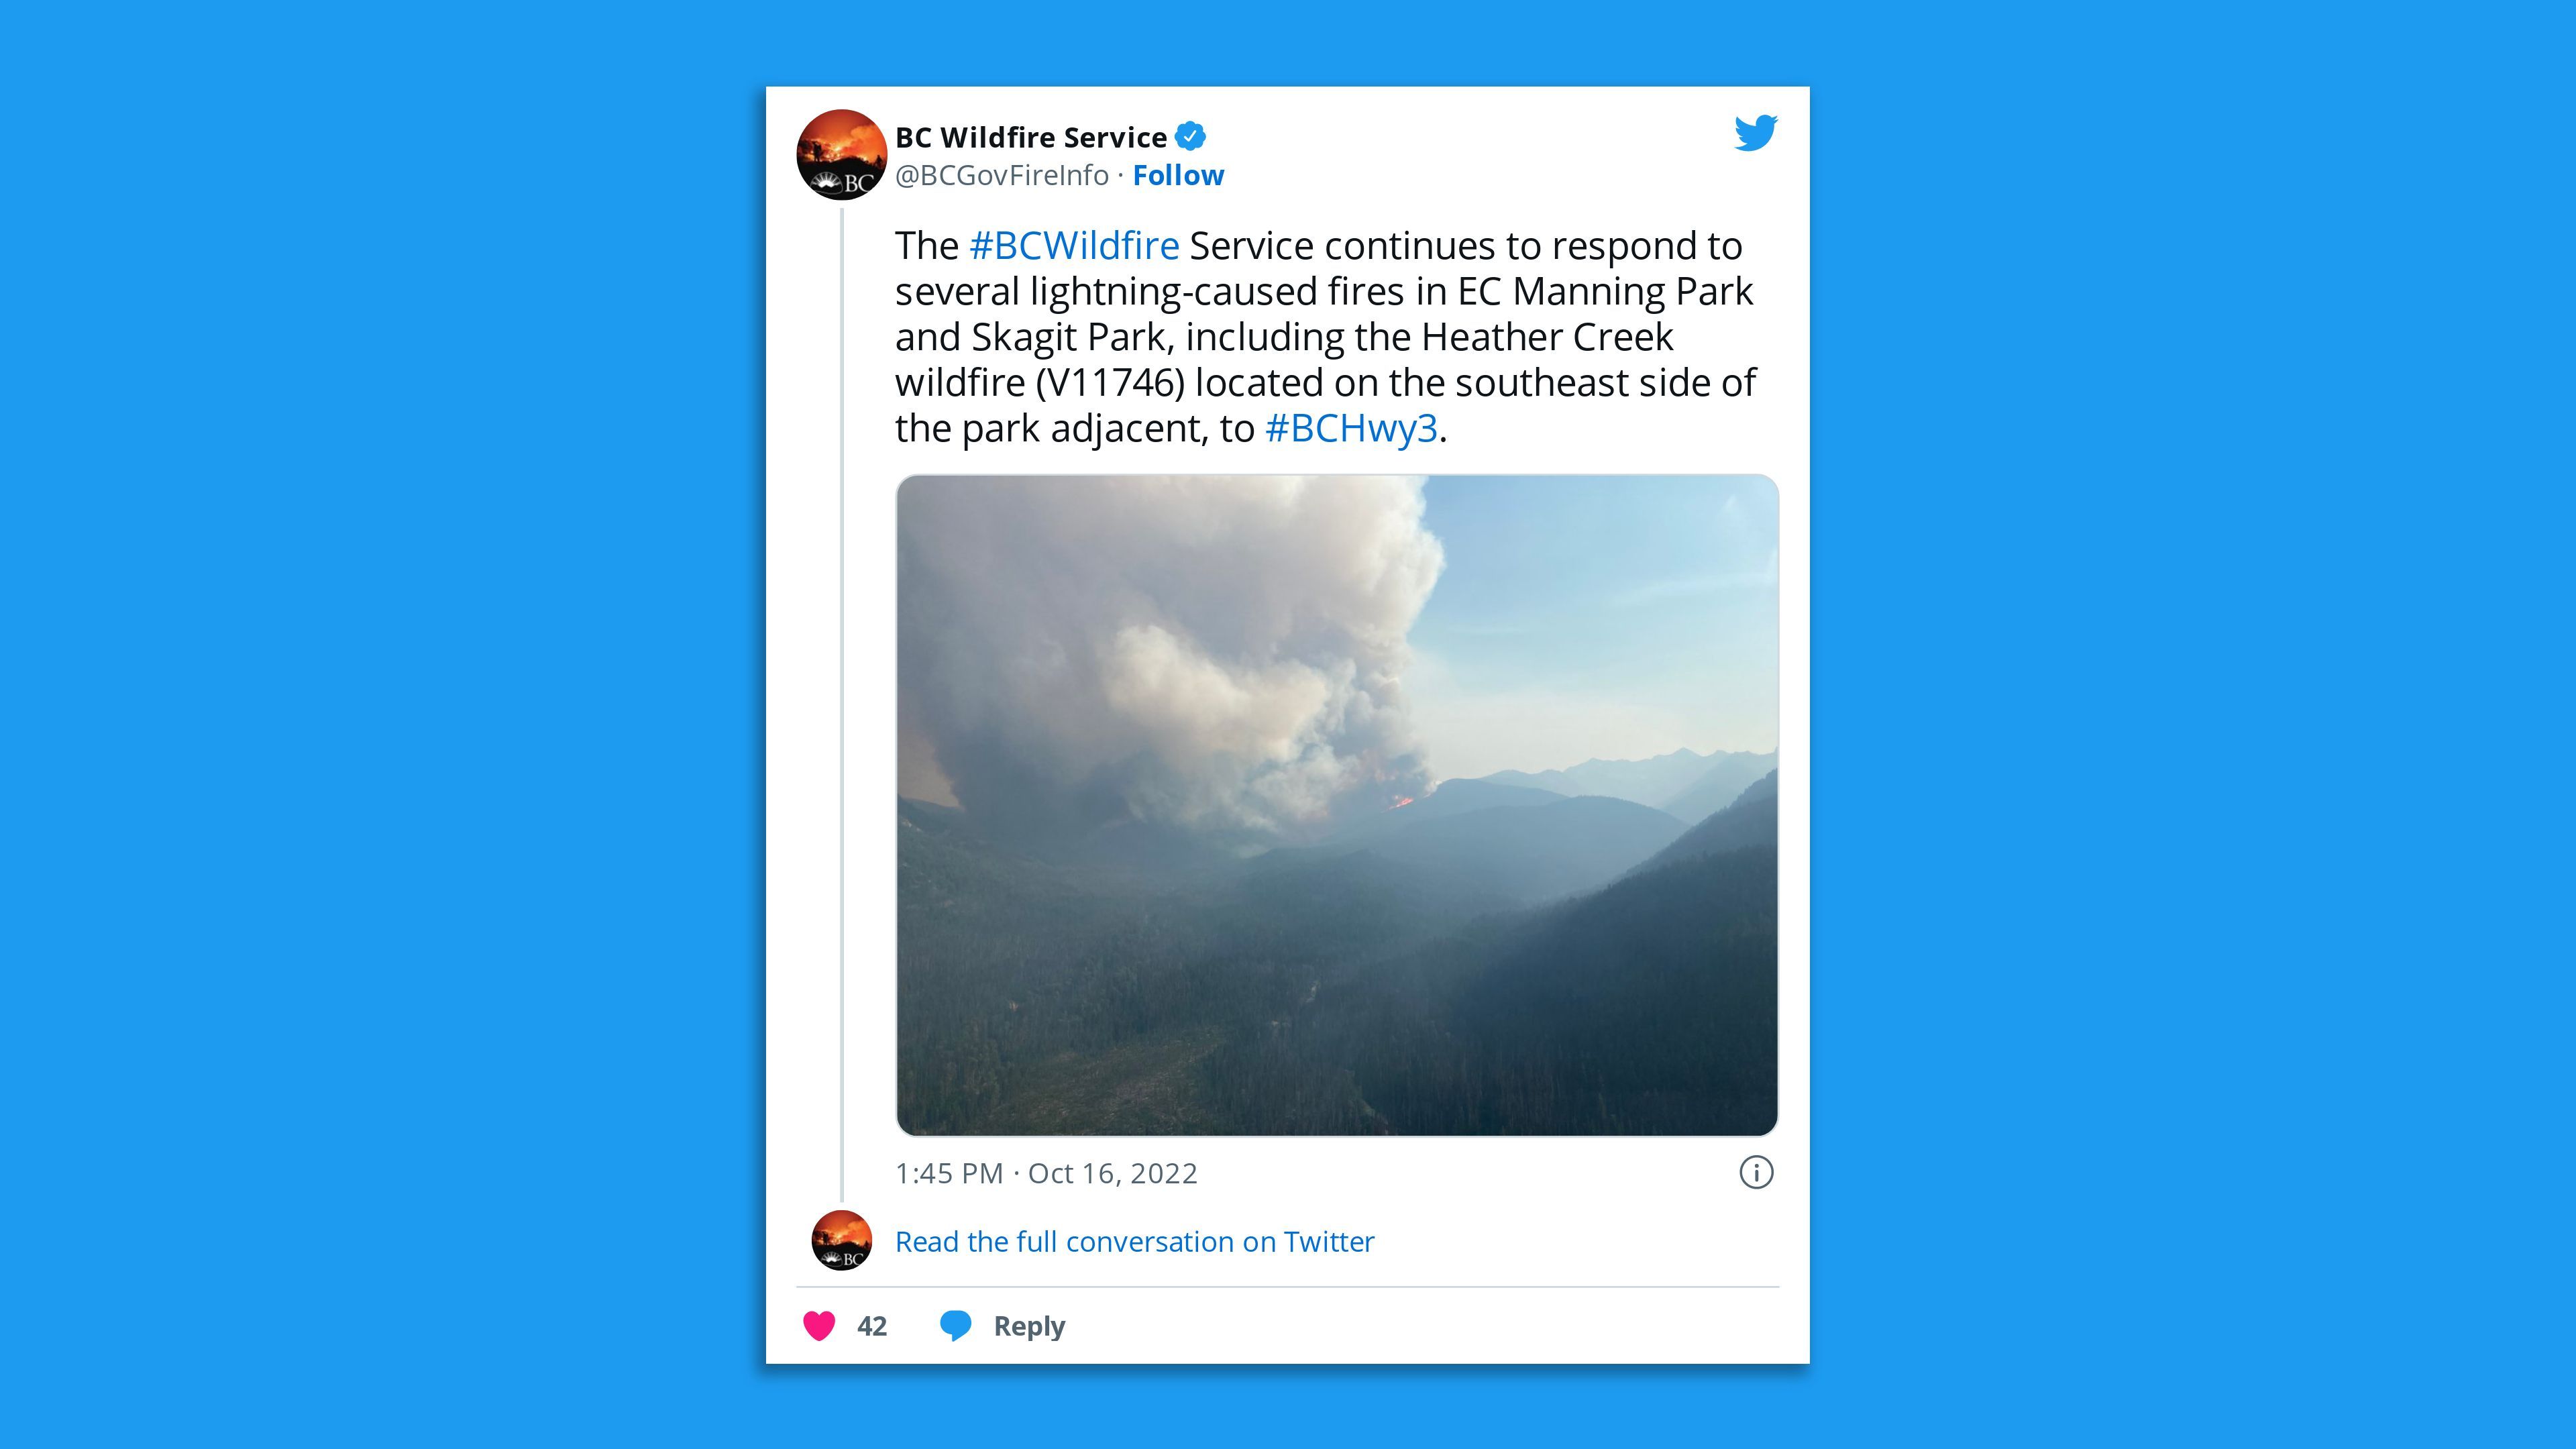 A Twitter post by Canada's BC Wildfire Service about firefighters responding to several lightening-caused fires.